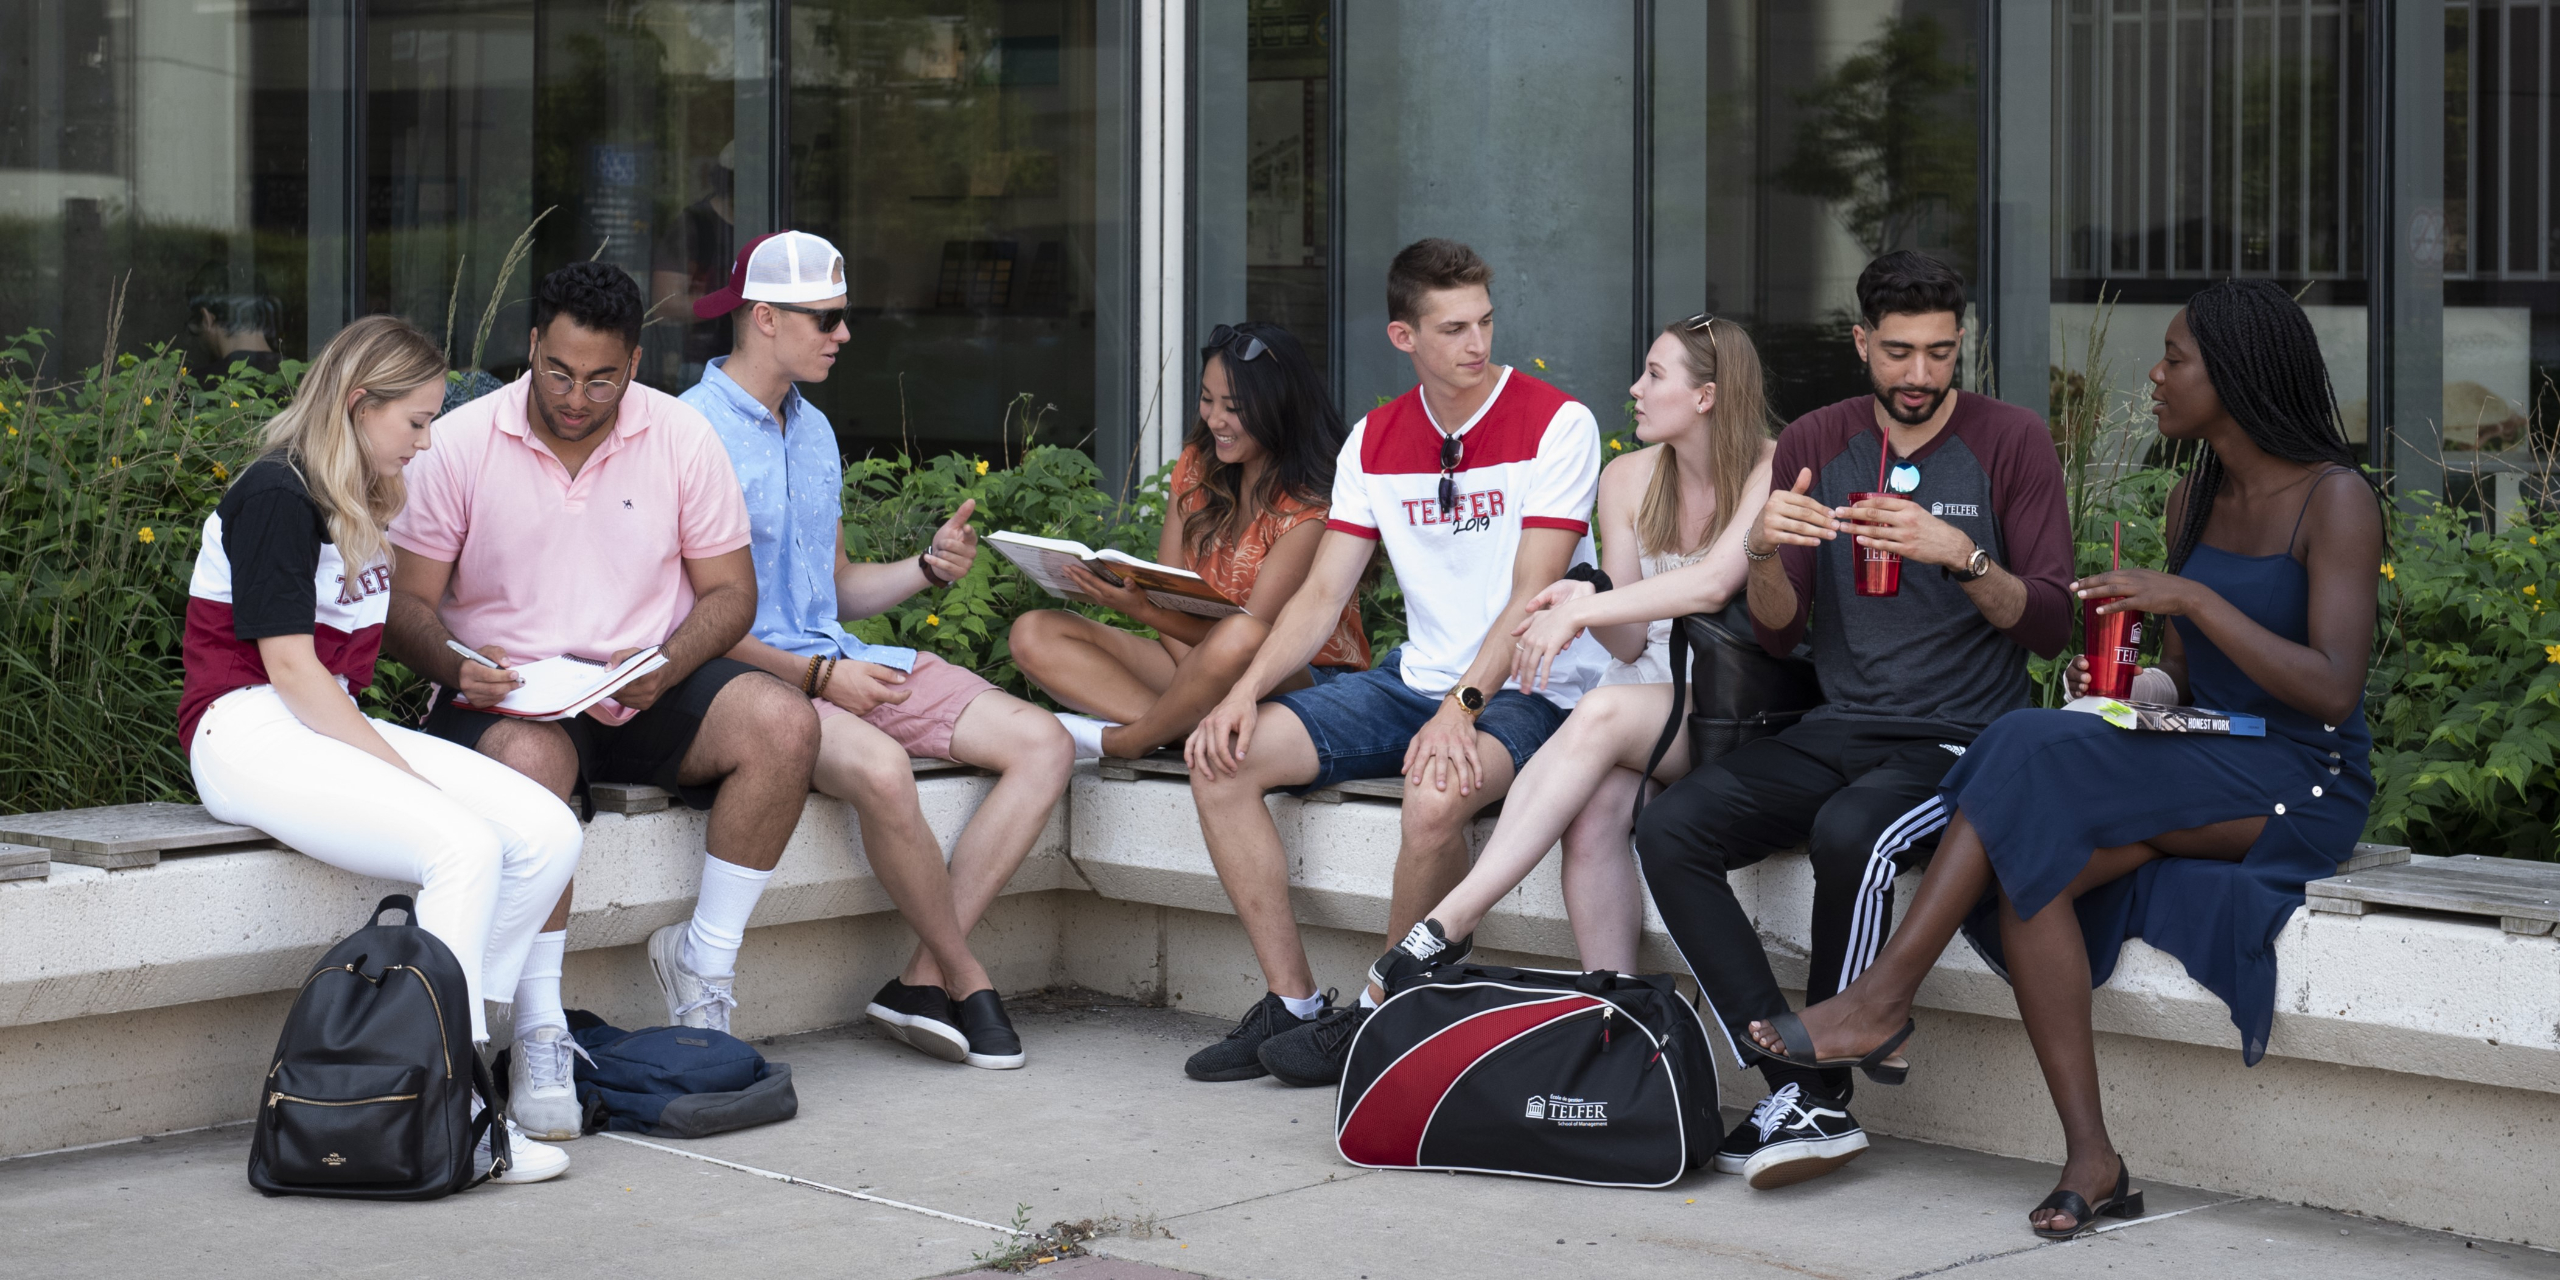 Students sitting outside talking